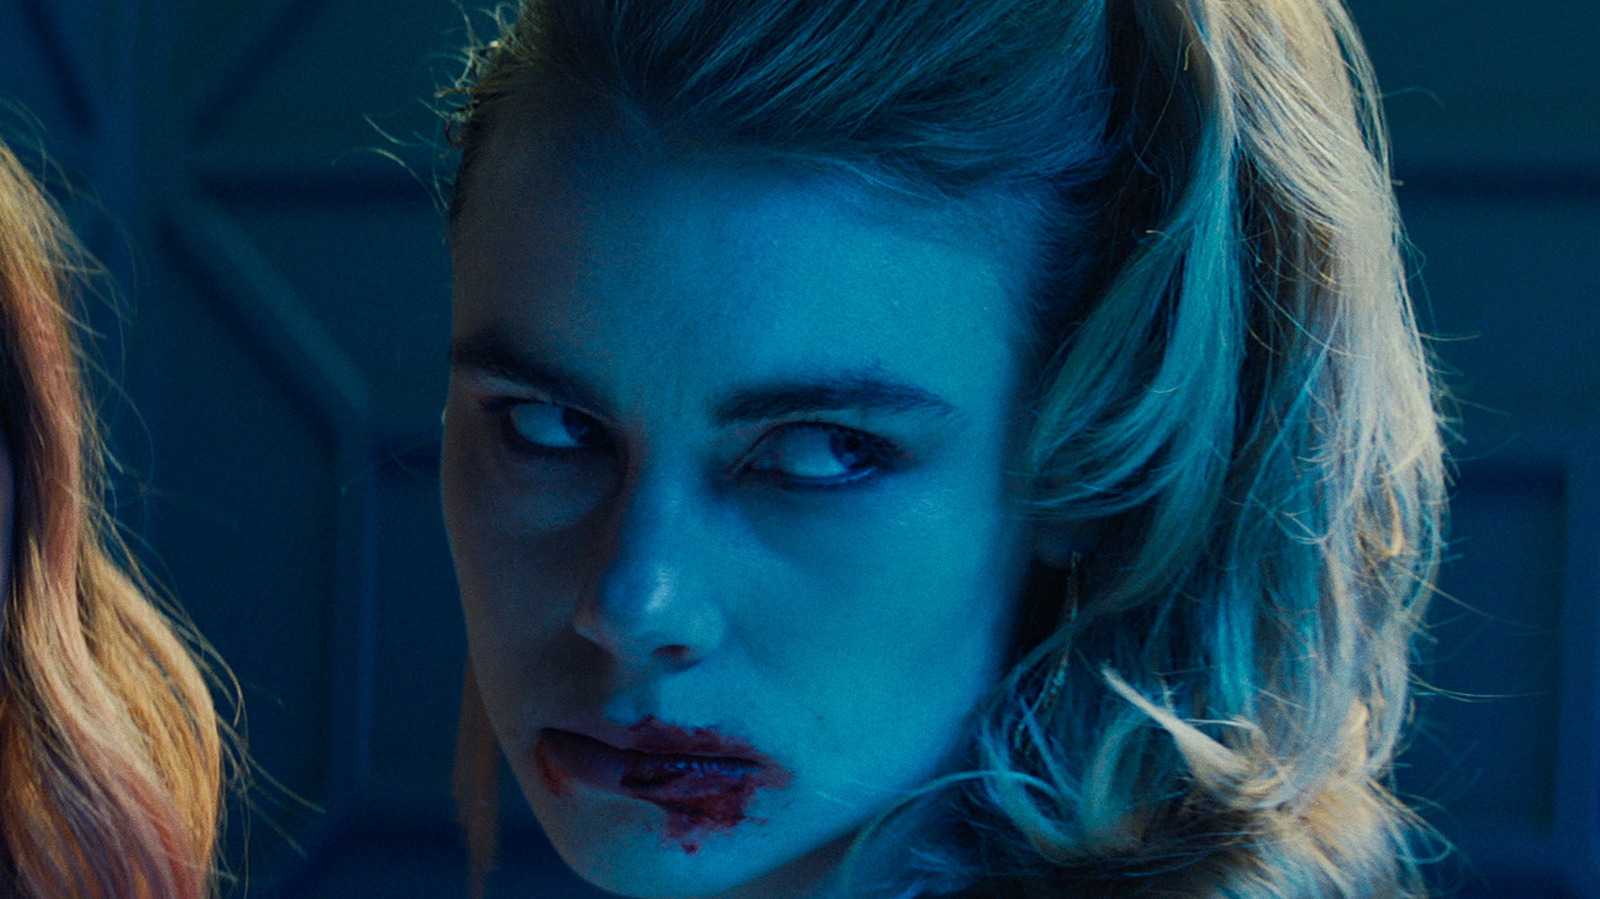 Lucy Fry Dishes On Night Teeth, Accent Work, And Why She Loves Playing Vampires